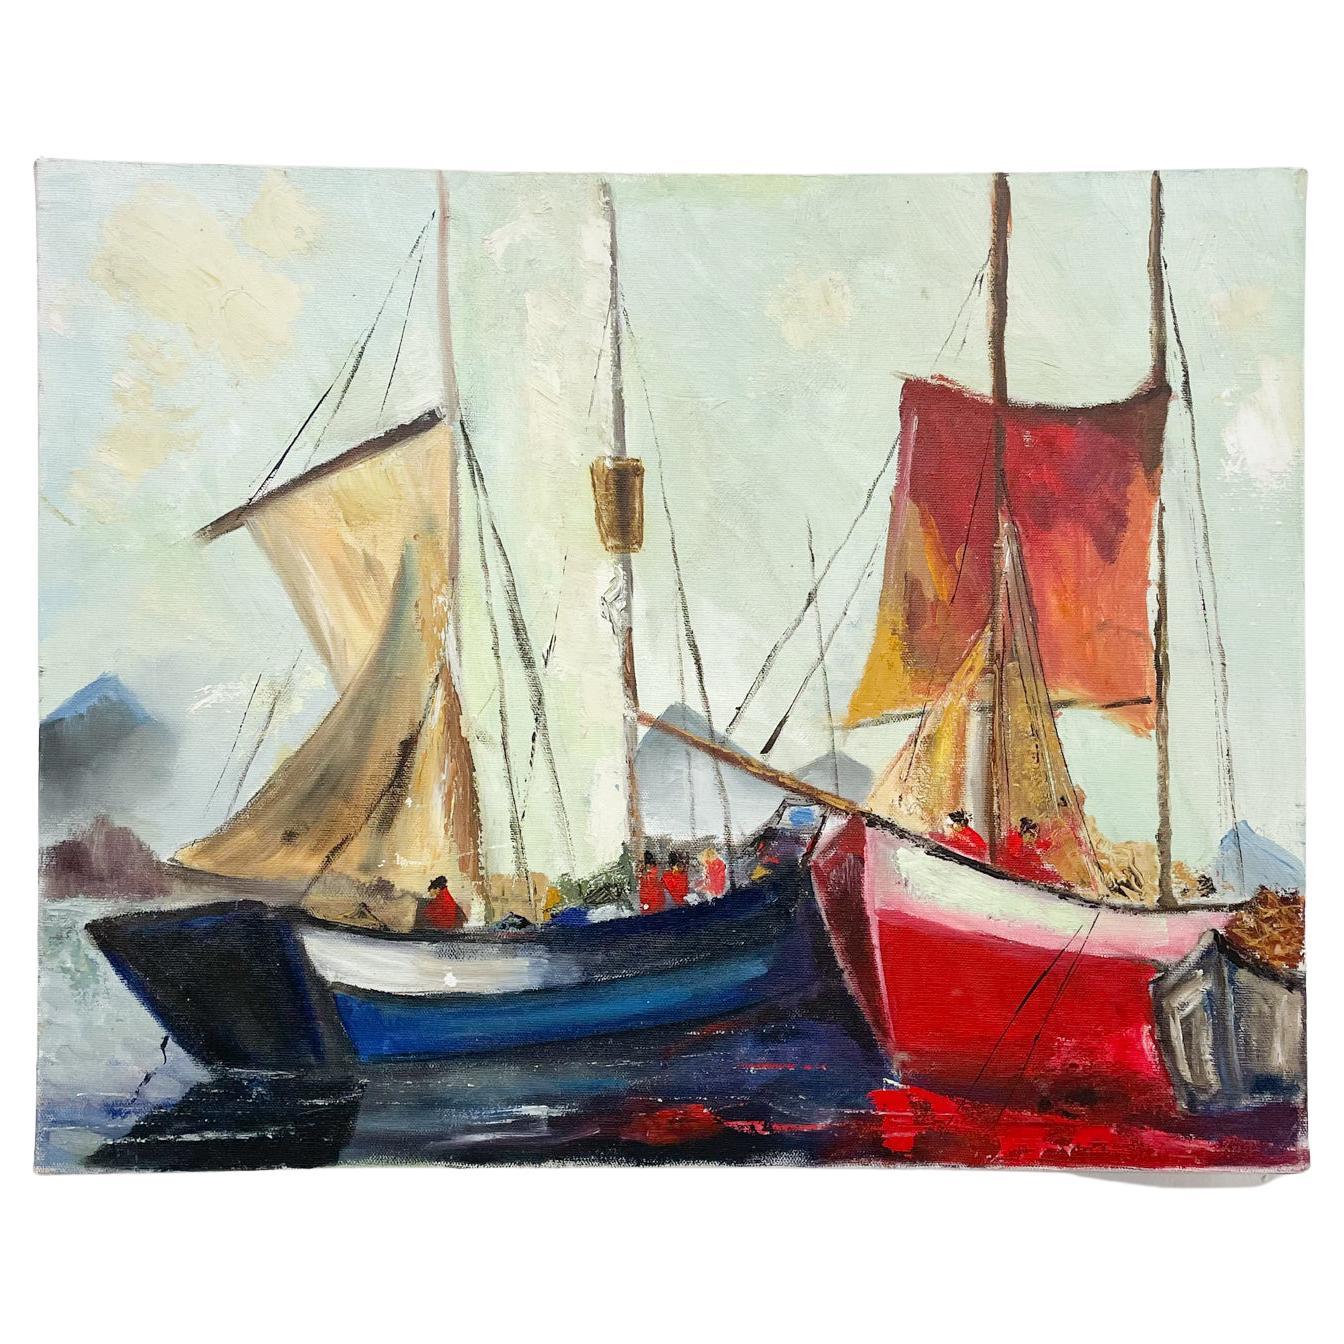 Modern Sailboat Art Oil Painting on Canvas in Red White and Blue